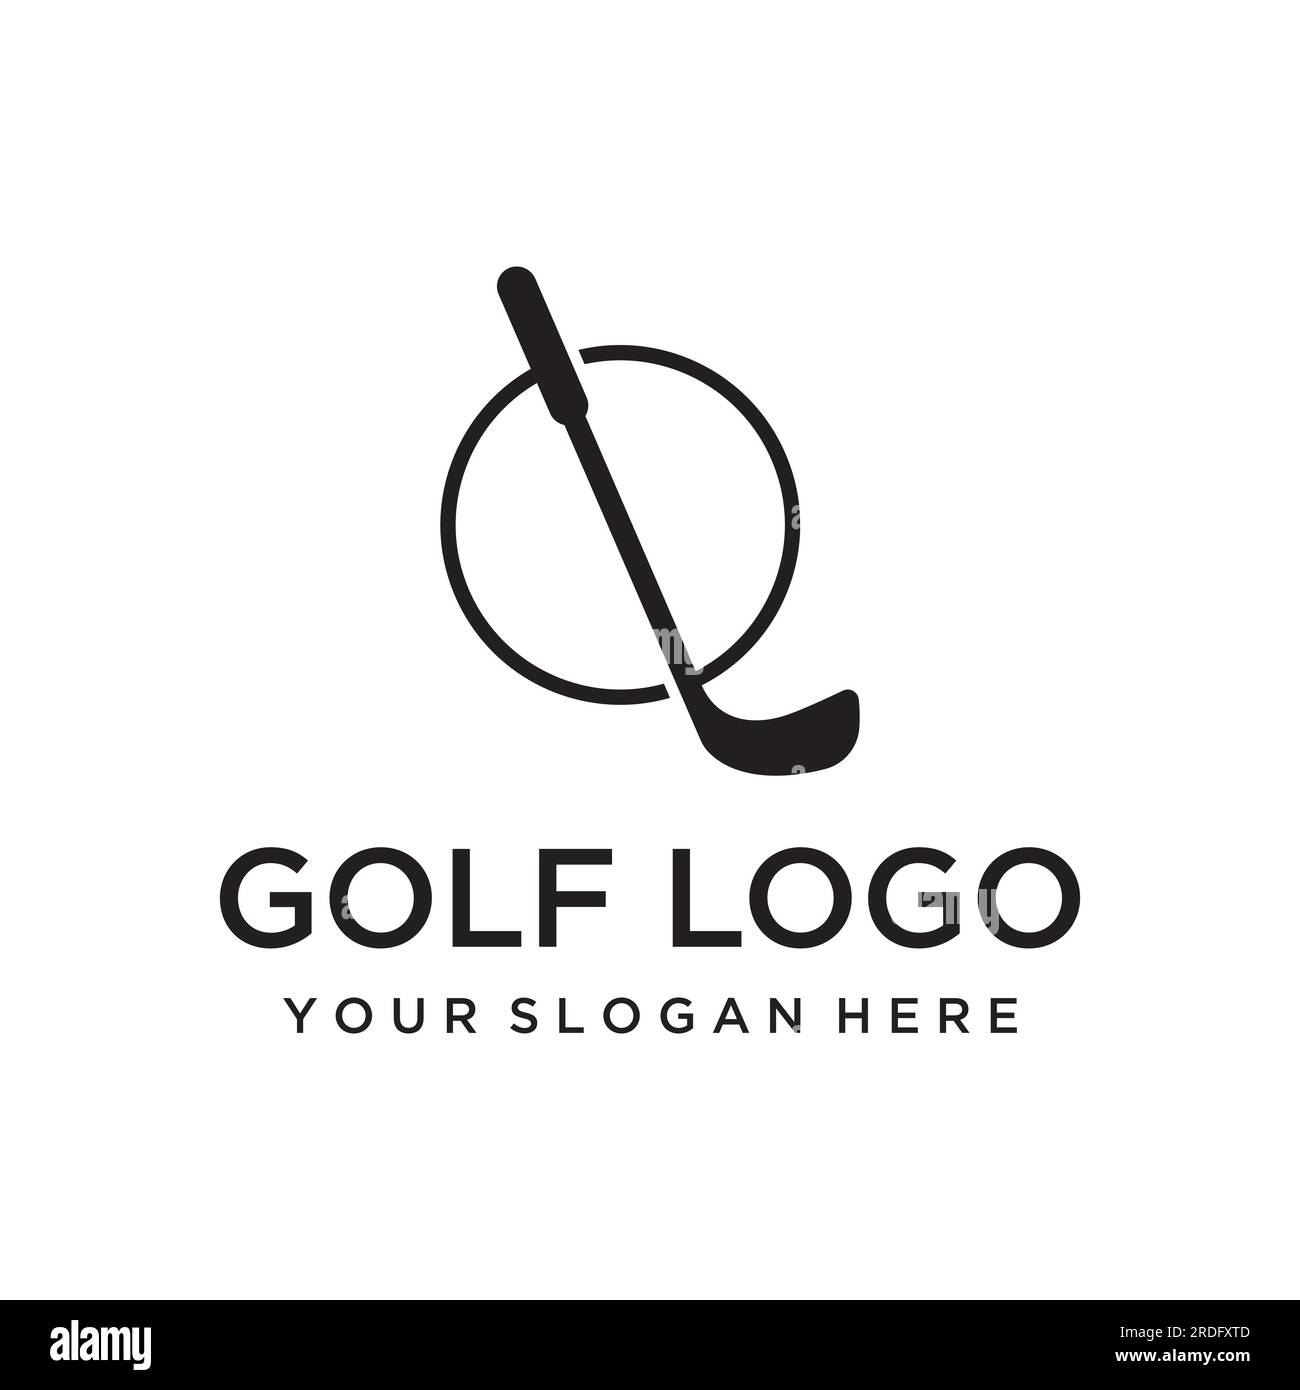 Golf Icon Crossed Golf Clubs Or Sticks With Ball On Tee Vector Illustration  Stock Illustration - Download Image Now - iStock